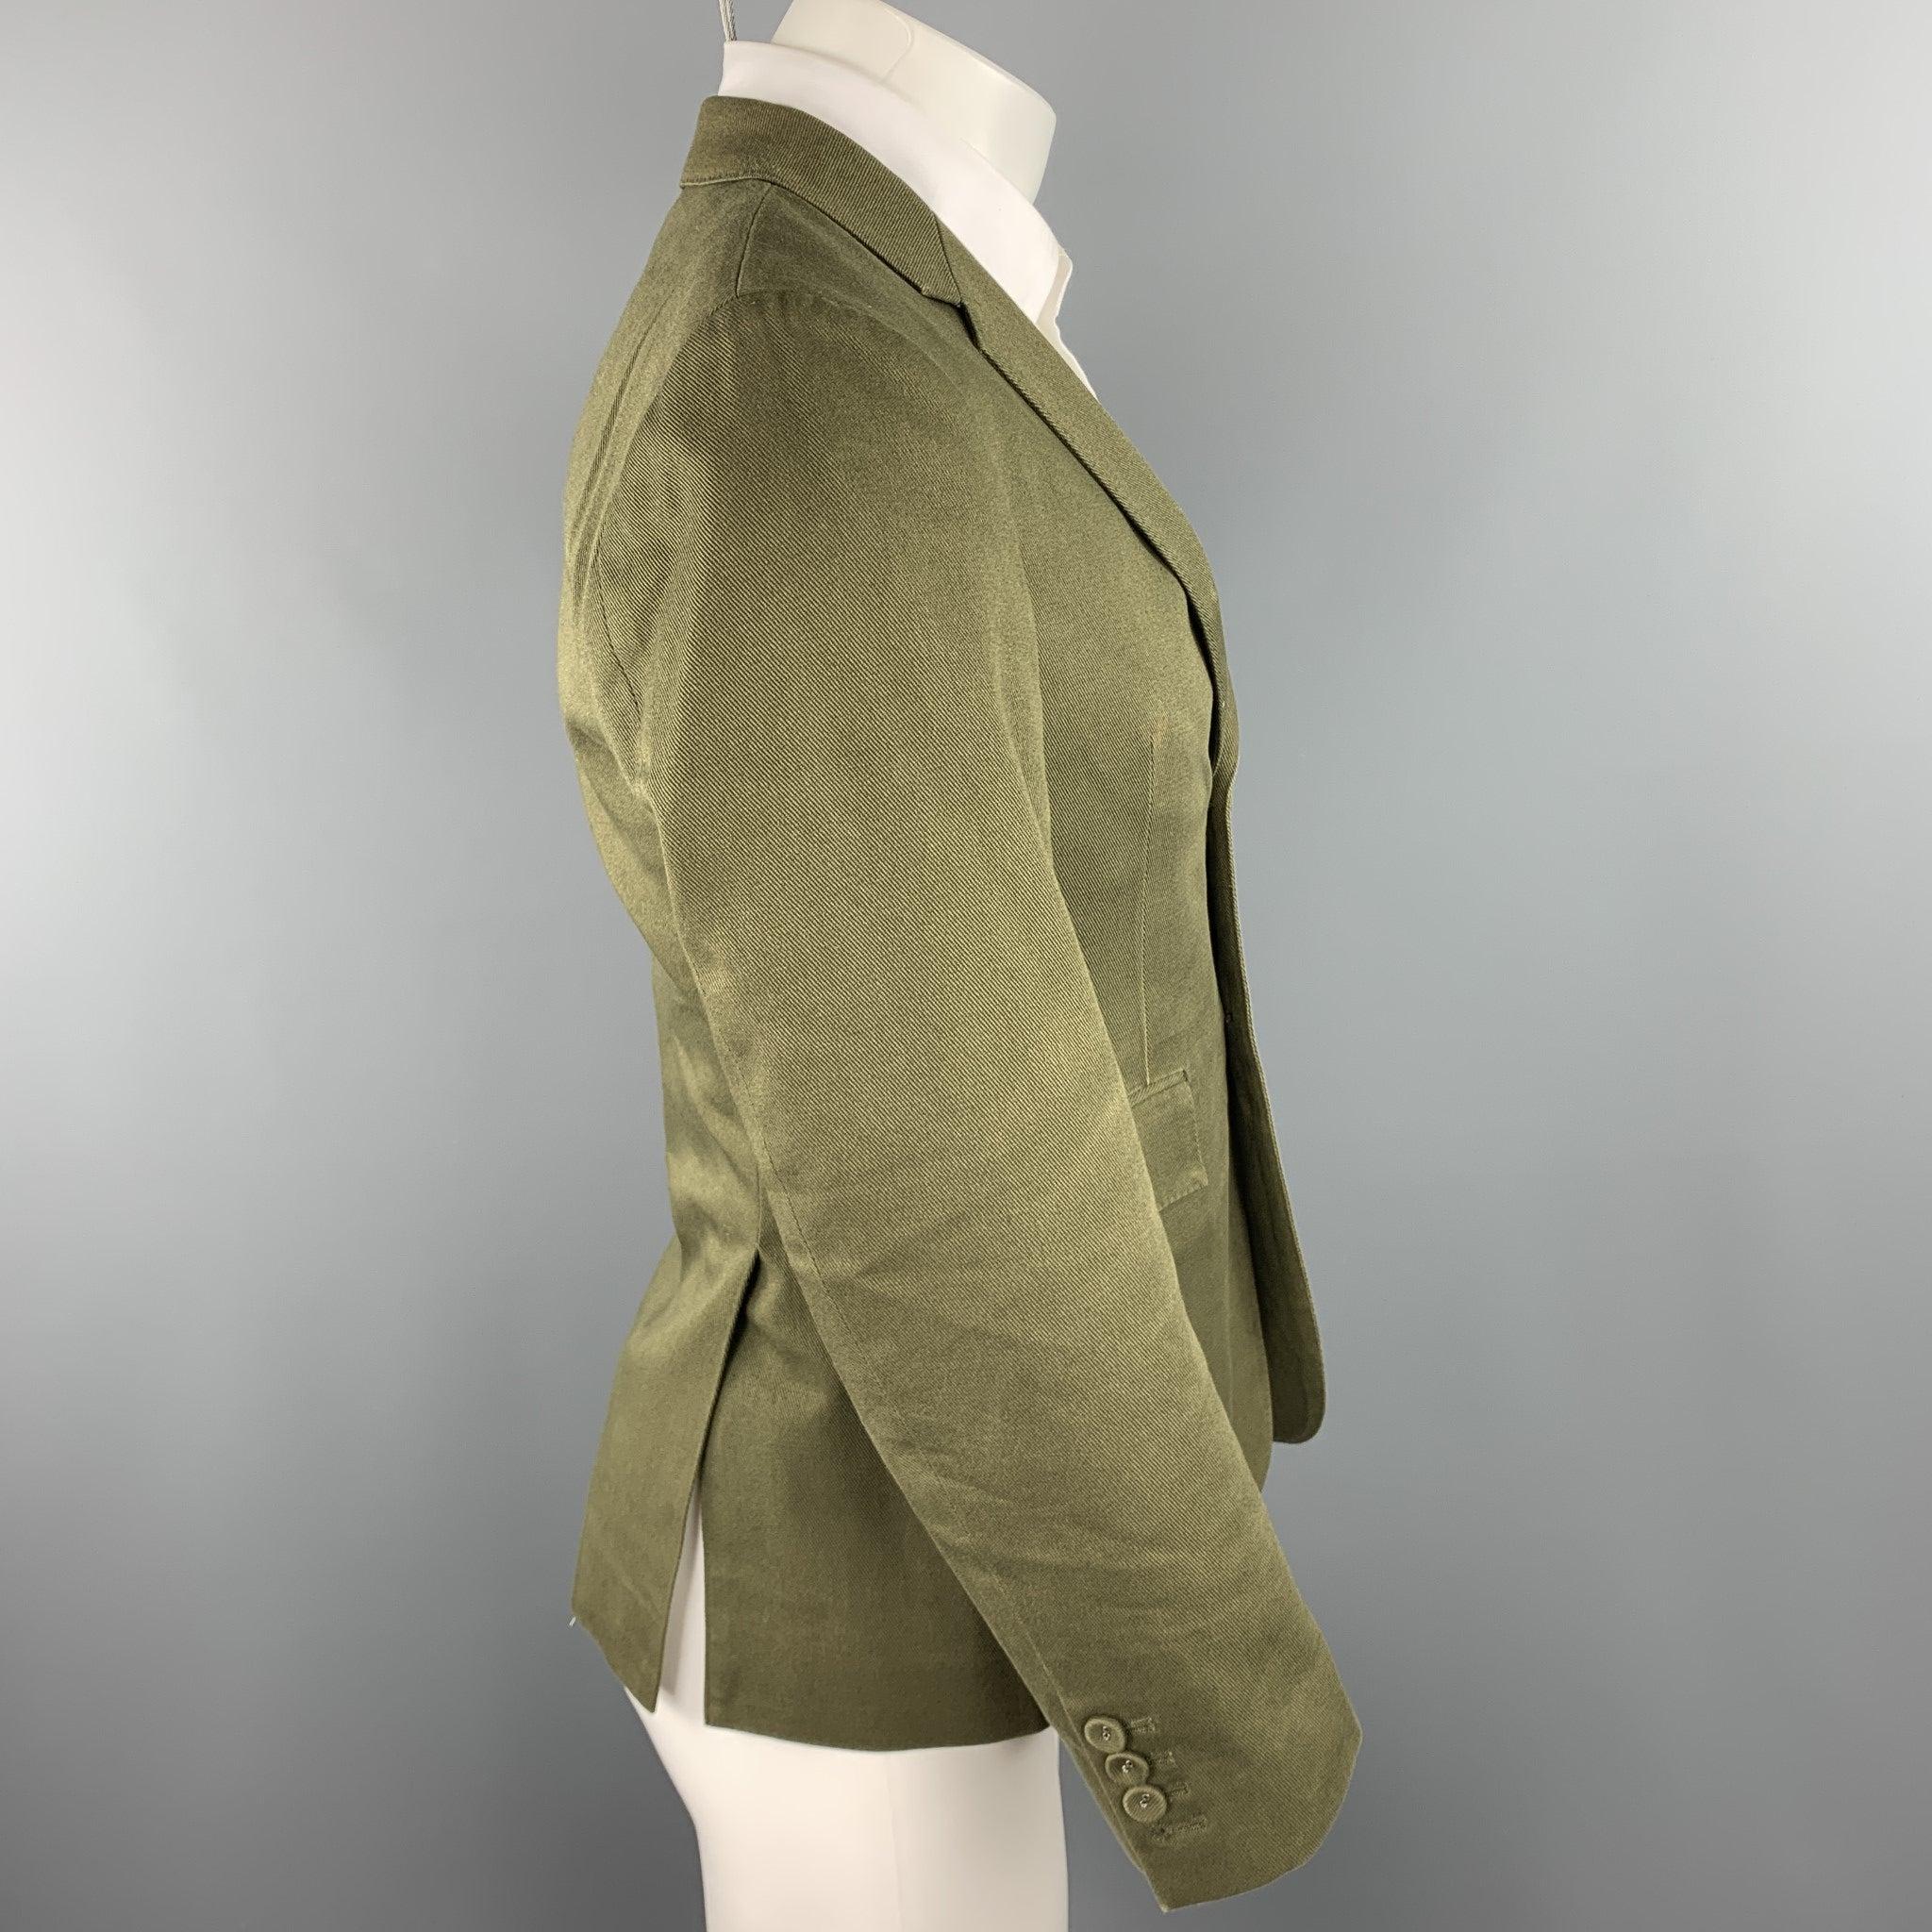 THOM BROWNE Size 38 Short Olive Cotton Notch Lapel Sport Coat In Good Condition For Sale In San Francisco, CA